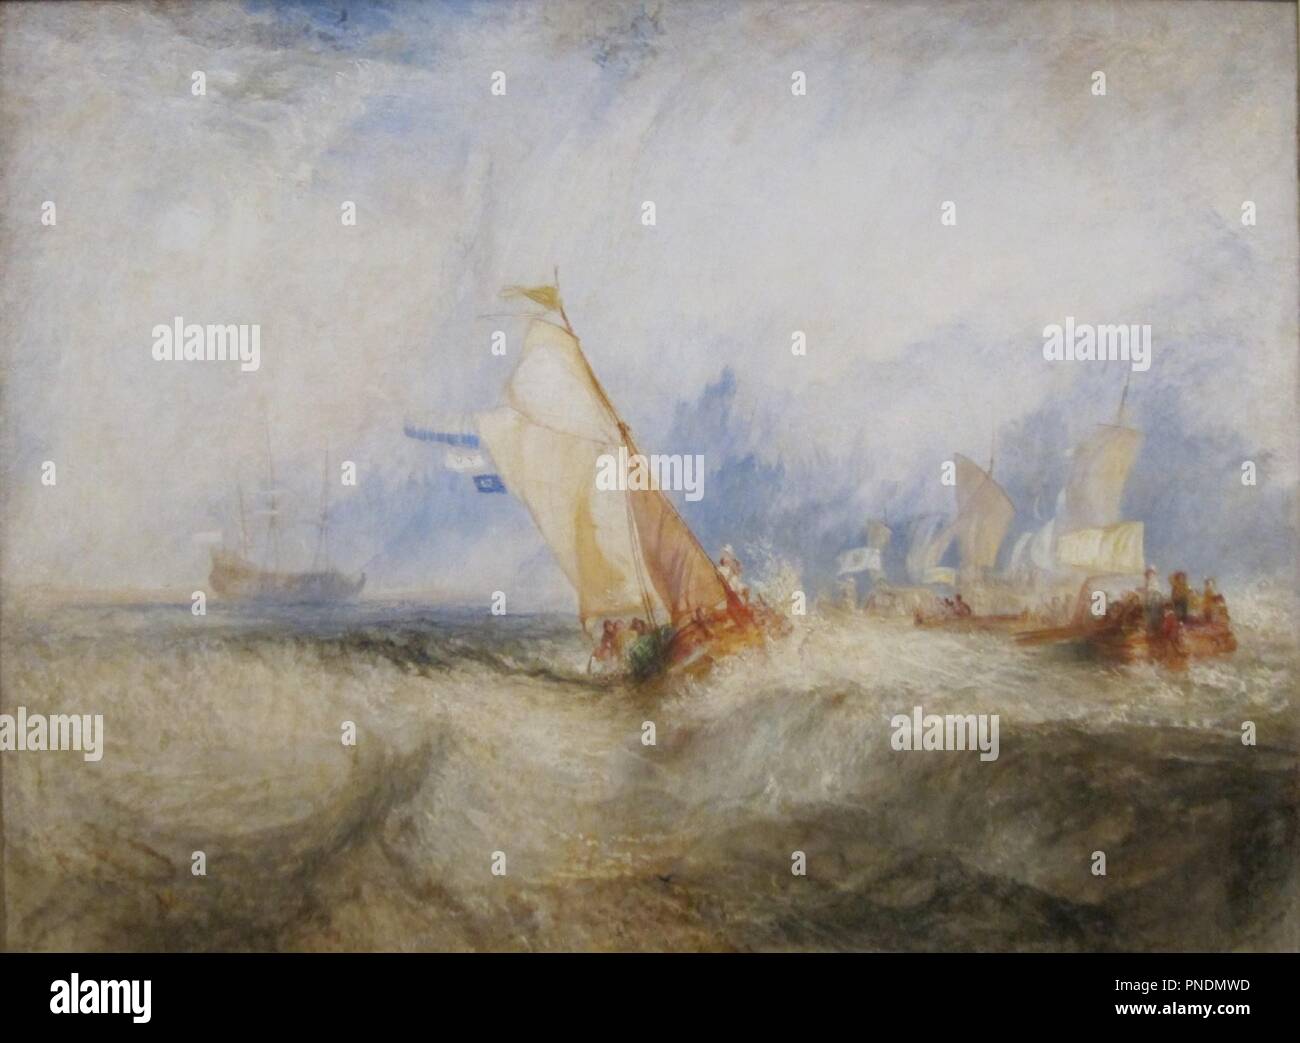 Van Tromp, Going About to Please his Masters, Ships a Sea, Getting a Good Wind. Date/Period: 1844. Painting. Oil on canvas. Height: 914 mm (35.9 in); Width: 1,219 mm (47.9 in). Author: J. M. W. Turner. William Turner. Stock Photo